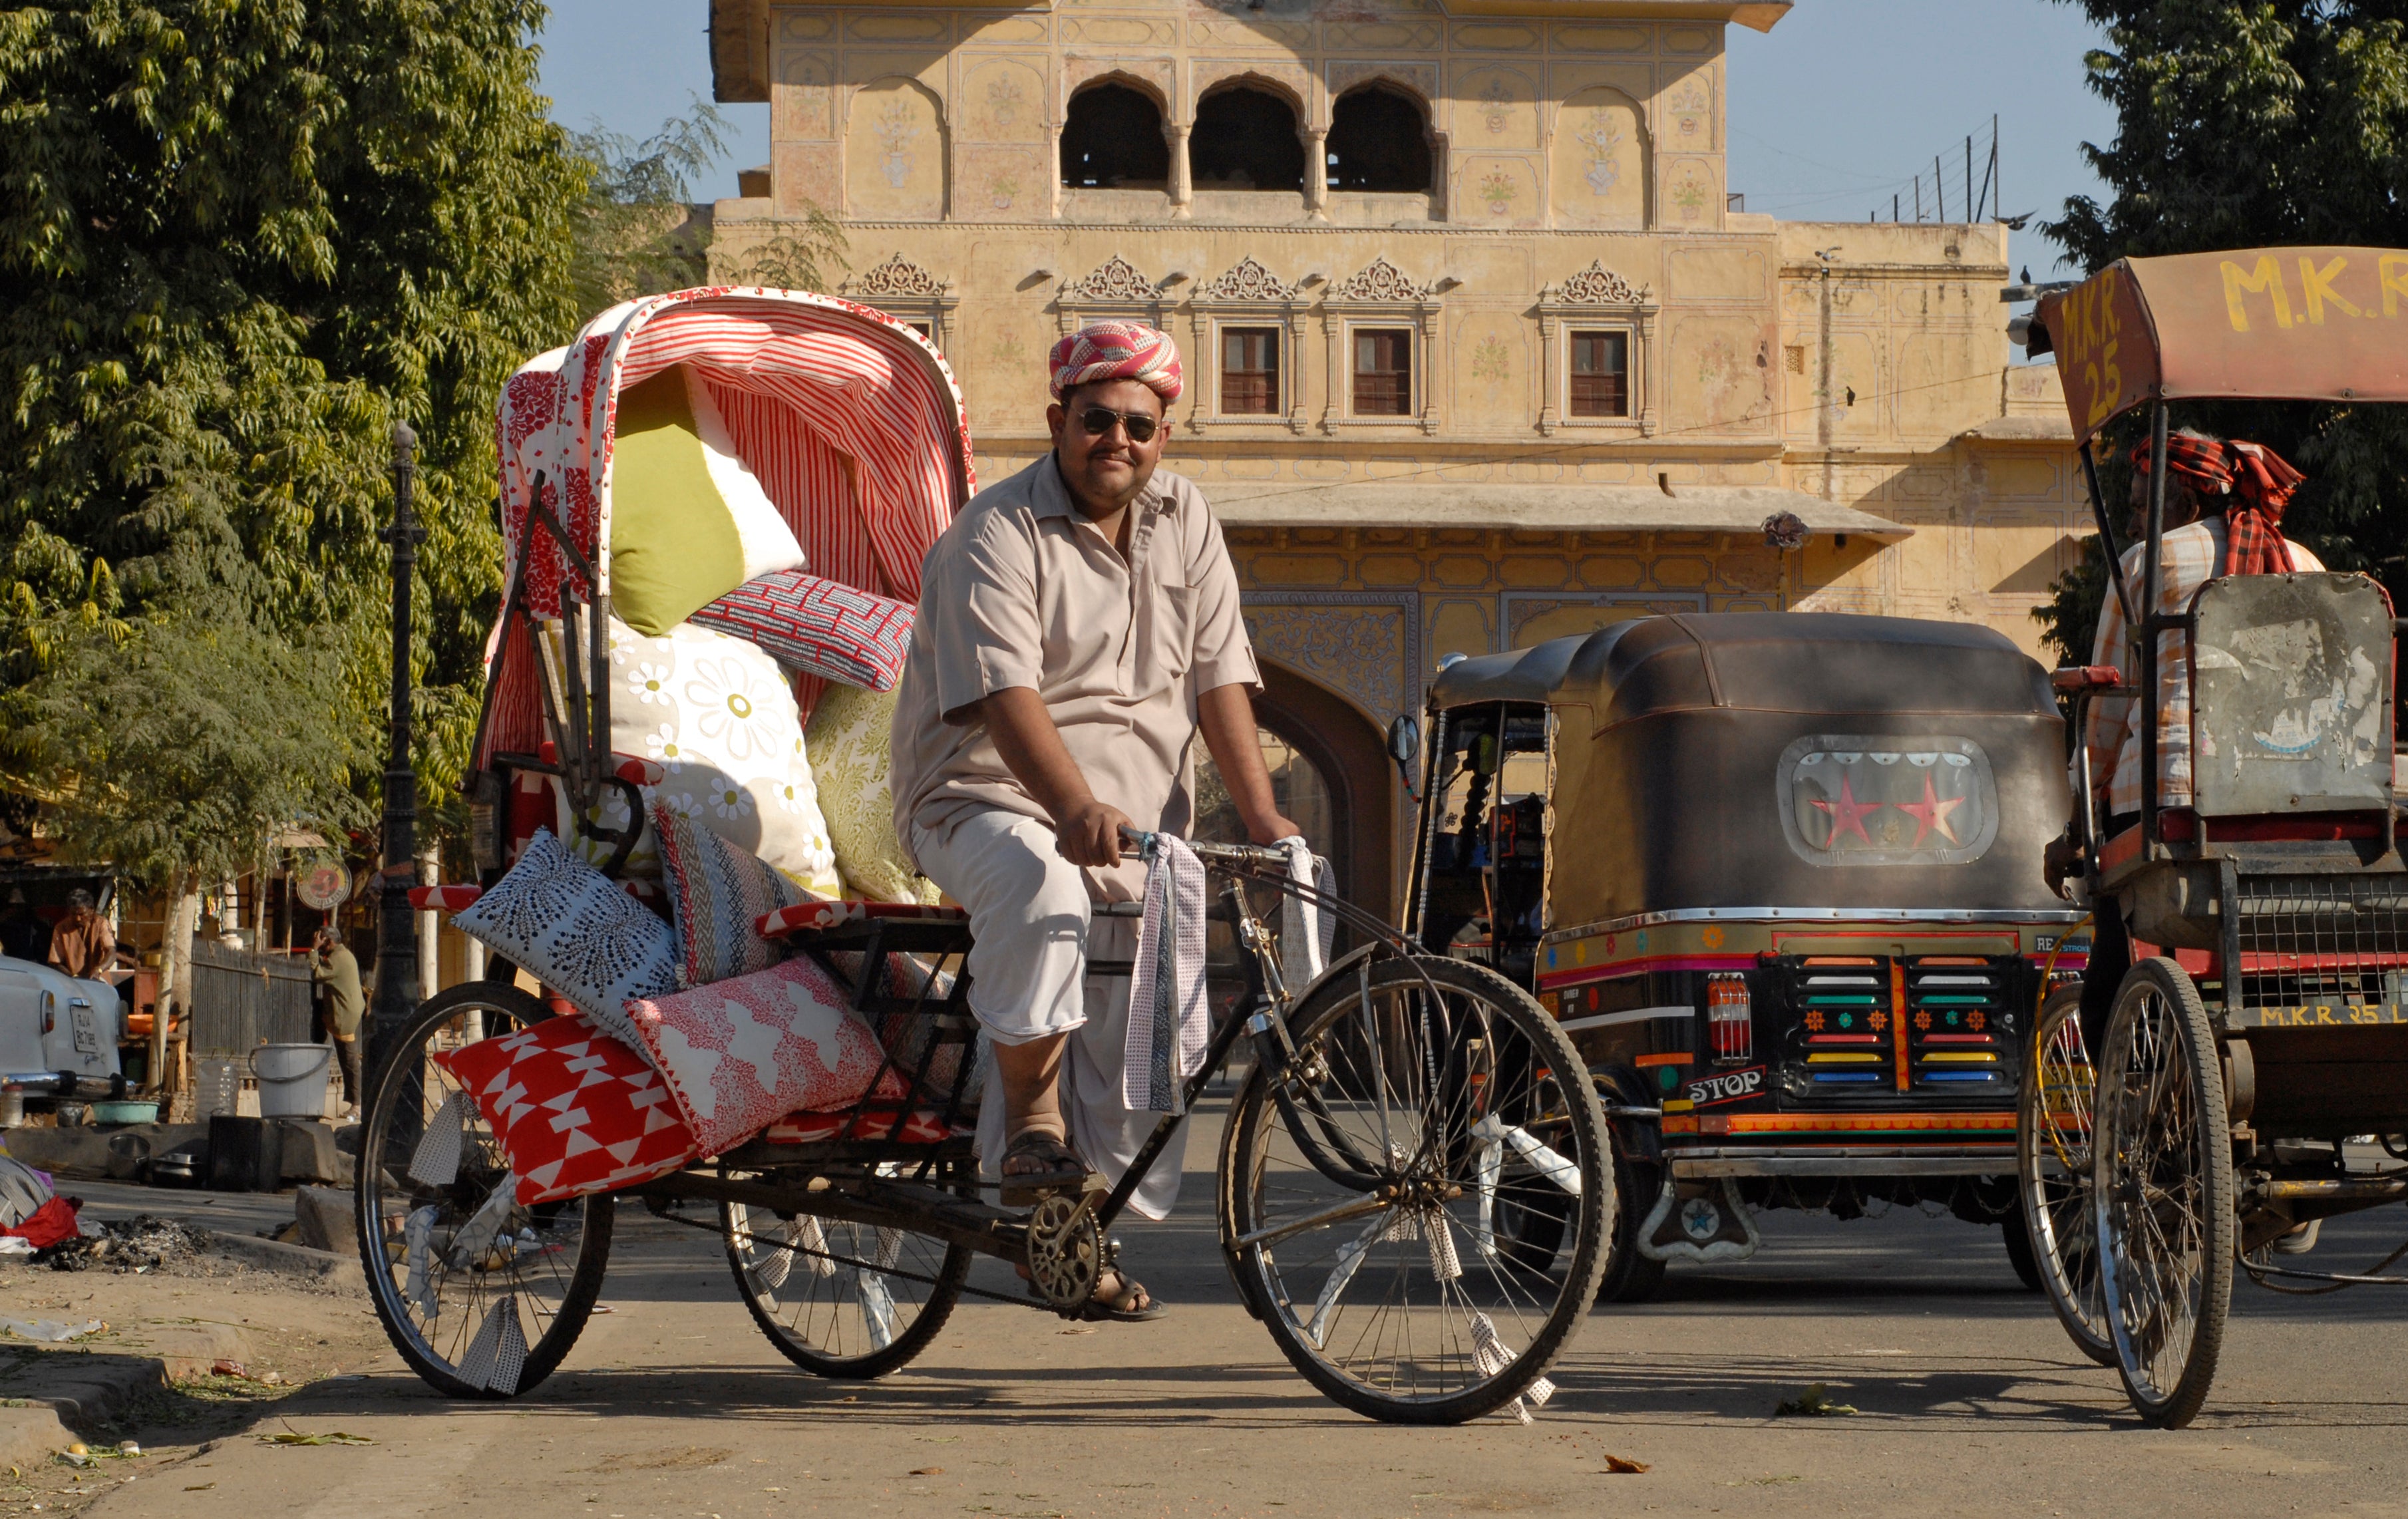 A rickshaw driver carries a load of textiles. Photo by Jonas Spinoy.